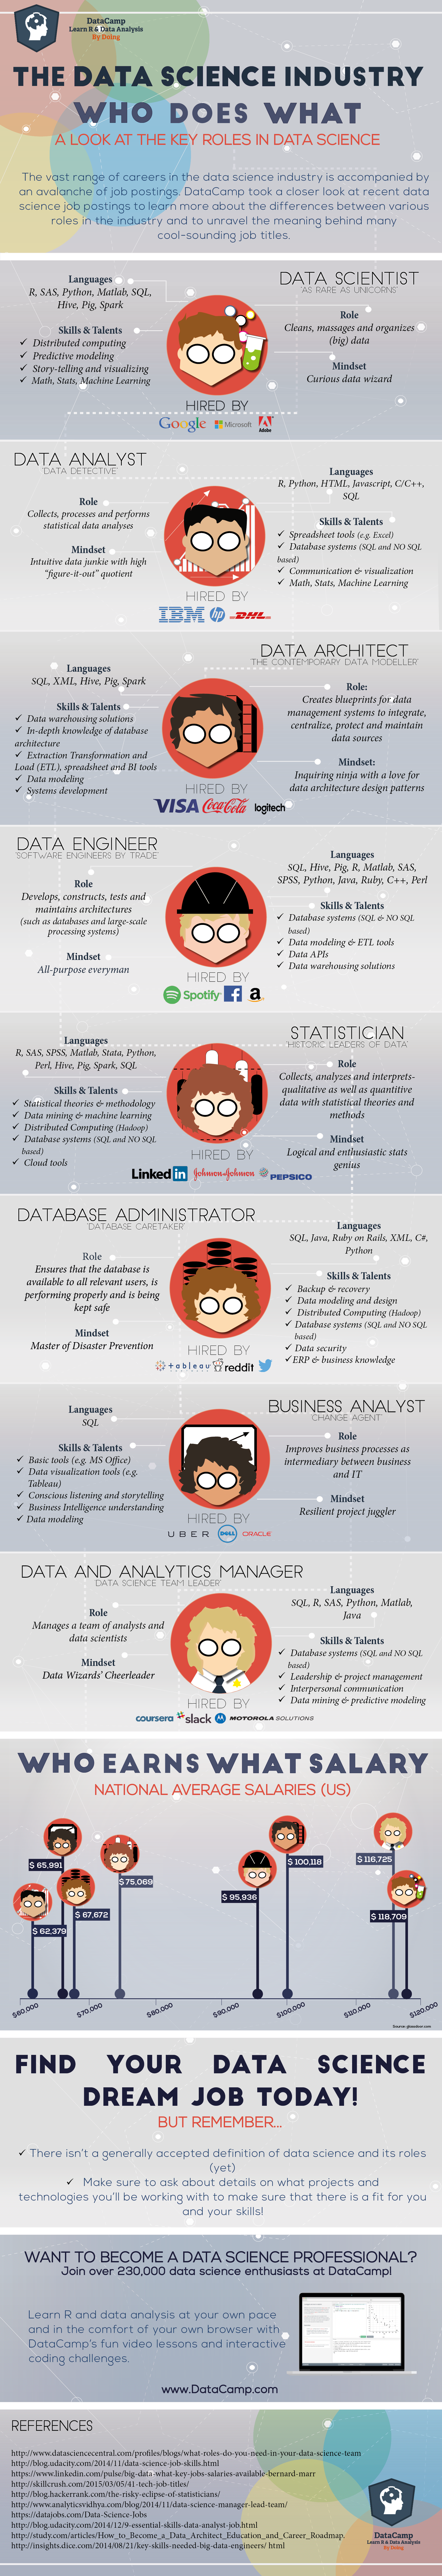 Important Job Roles in Data Science Industry Today - Who ...